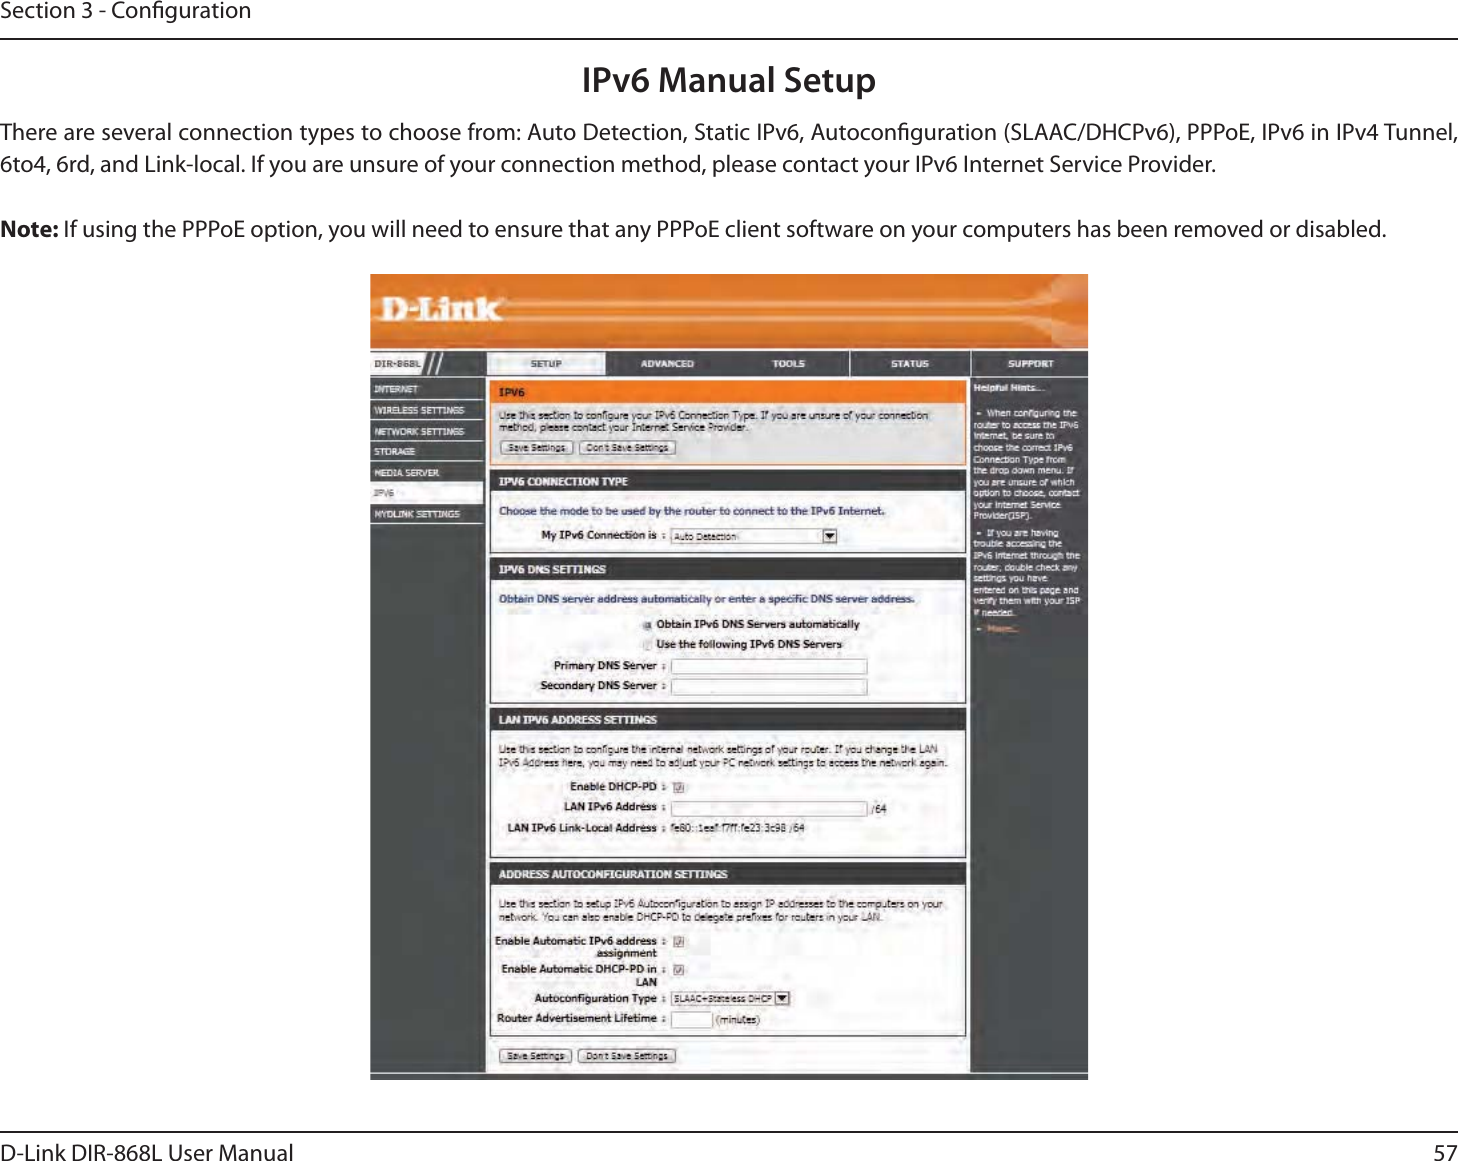 57D-Link DIR-868L User ManualSection 3 - CongurationIPv6 Manual SetupThere are several connection types to choose from: Auto Detection, Static IPv6, Autoconguration (SLAAC/DHCPv6), PPPoE, IPv6 in IPv4 Tunnel, 6to4, 6rd, and Link-local. If you are unsure of your connection method, please contact your IPv6 Internet Service Provider. Note: If using the PPPoE option, you will need to ensure that any PPPoE client software on your computers has been removed or disabled.